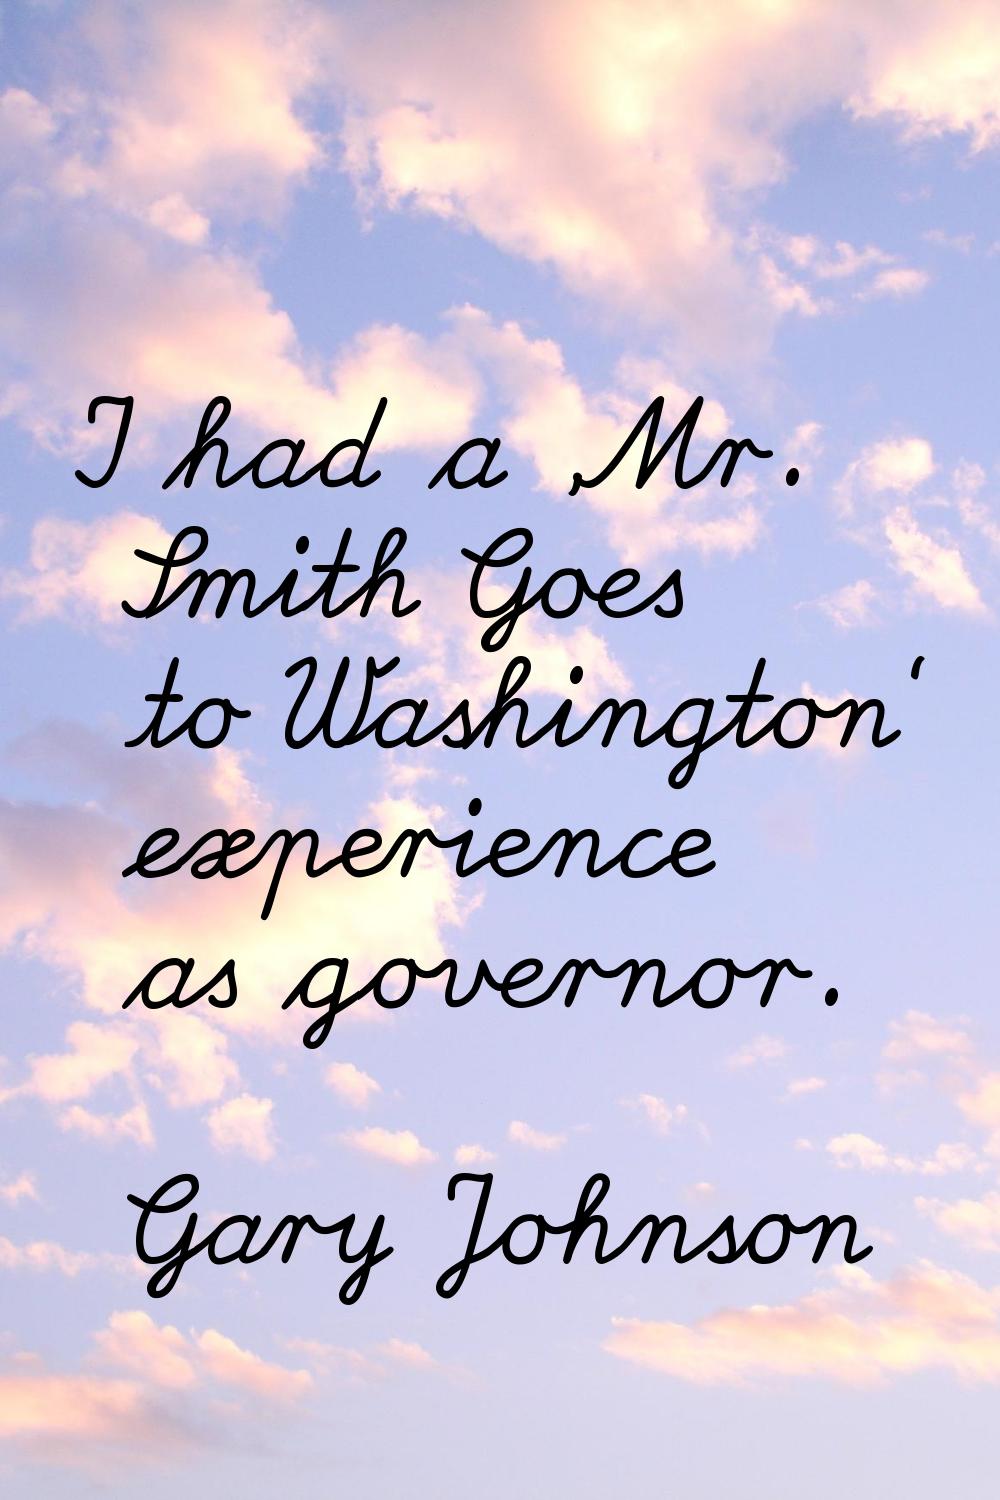 I had a 'Mr. Smith Goes to Washington' experience as governor.